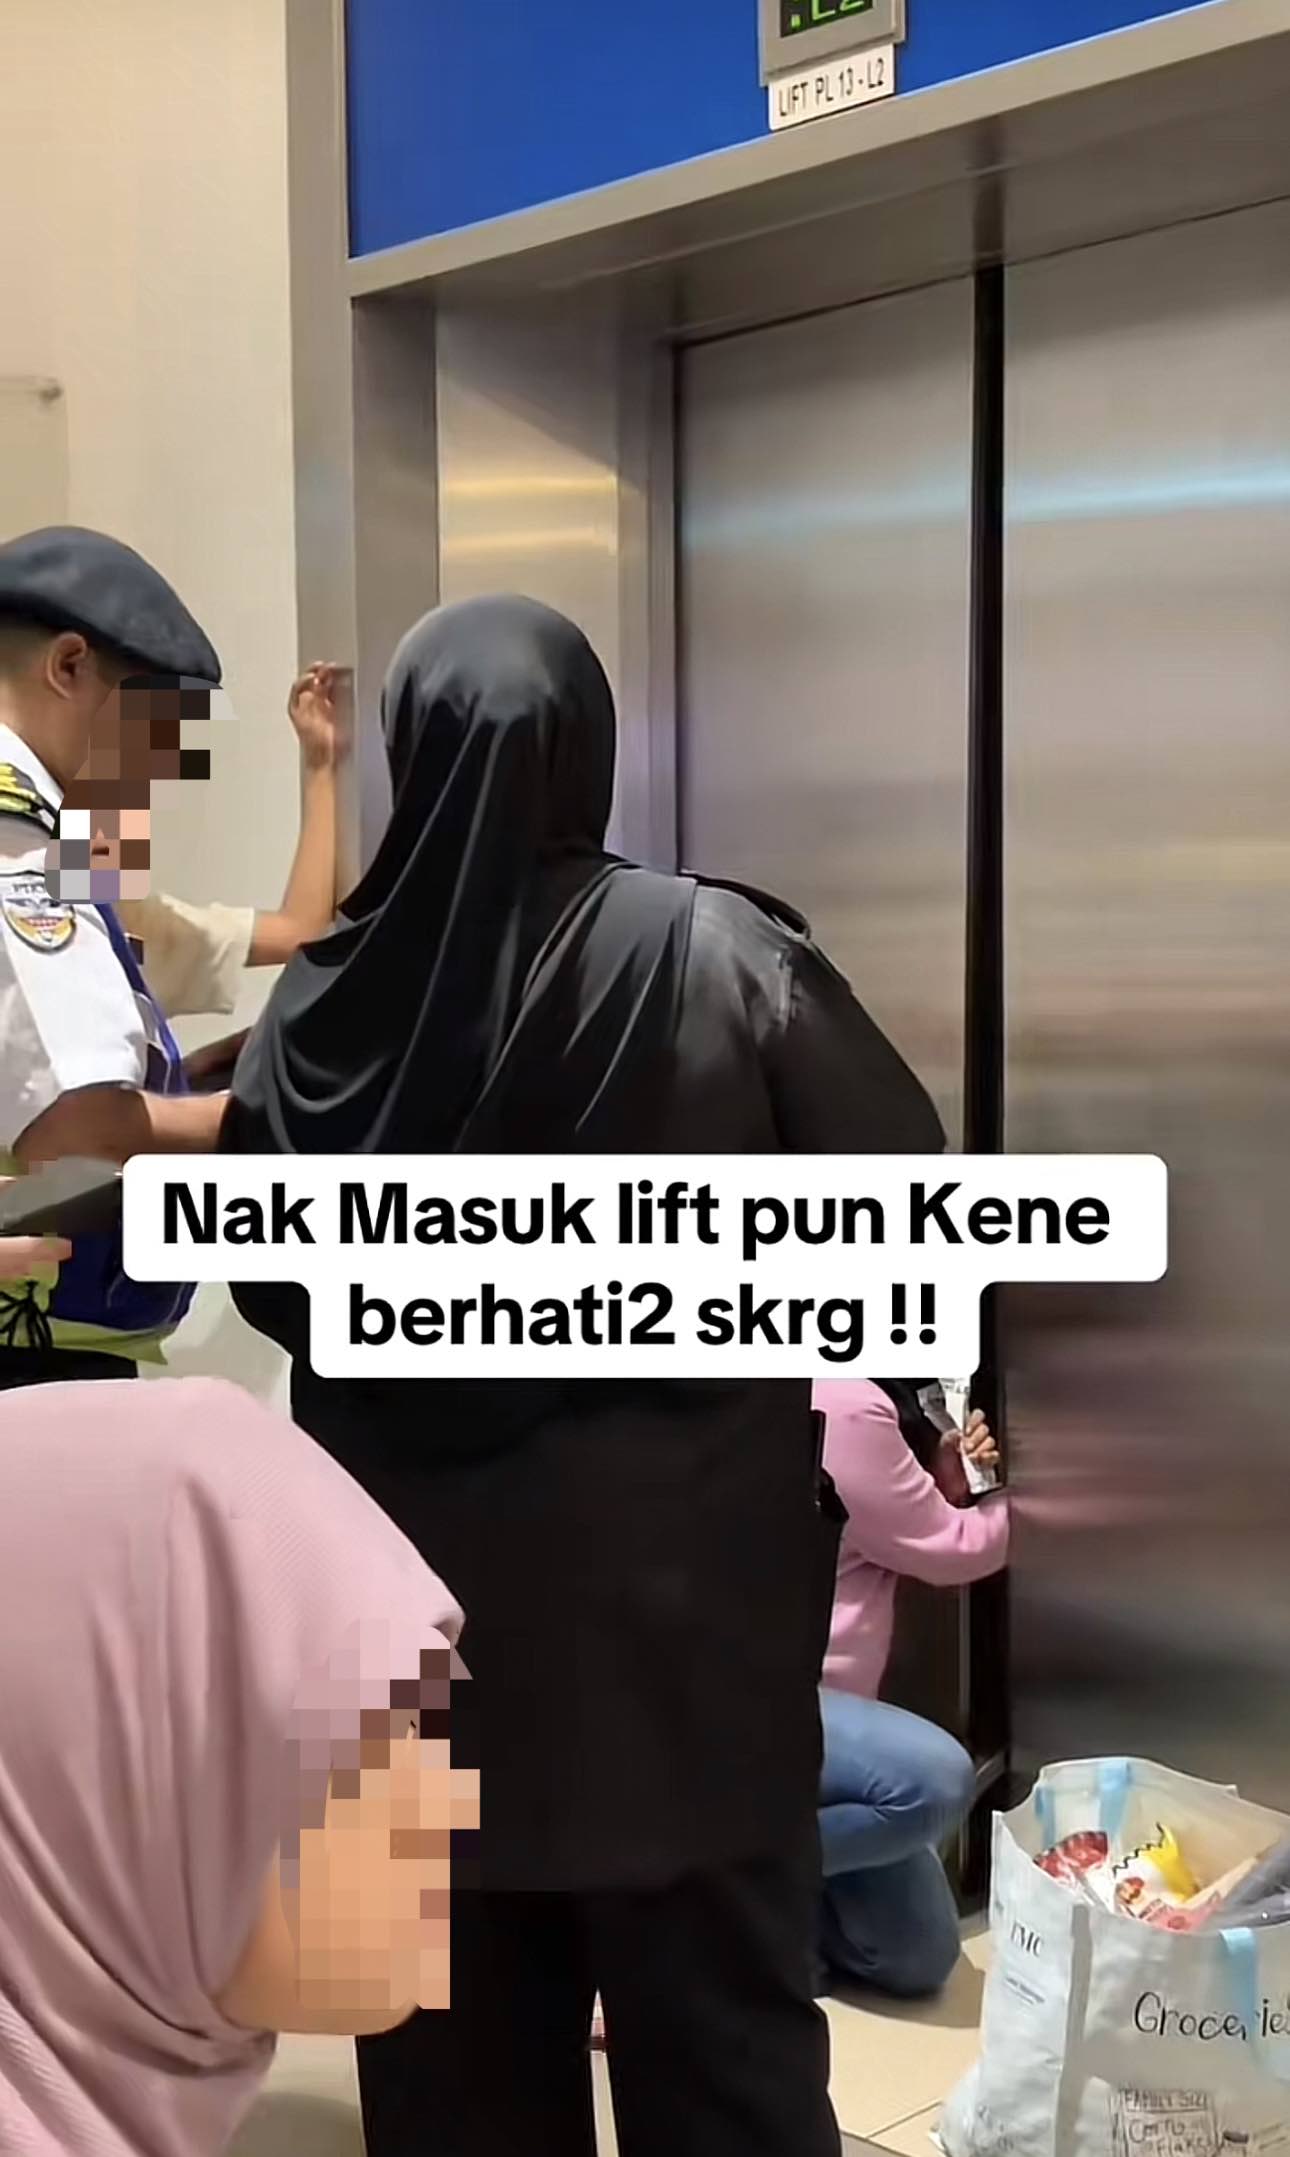 A commotion at a damansara mall after a kid gets stuck in lift.